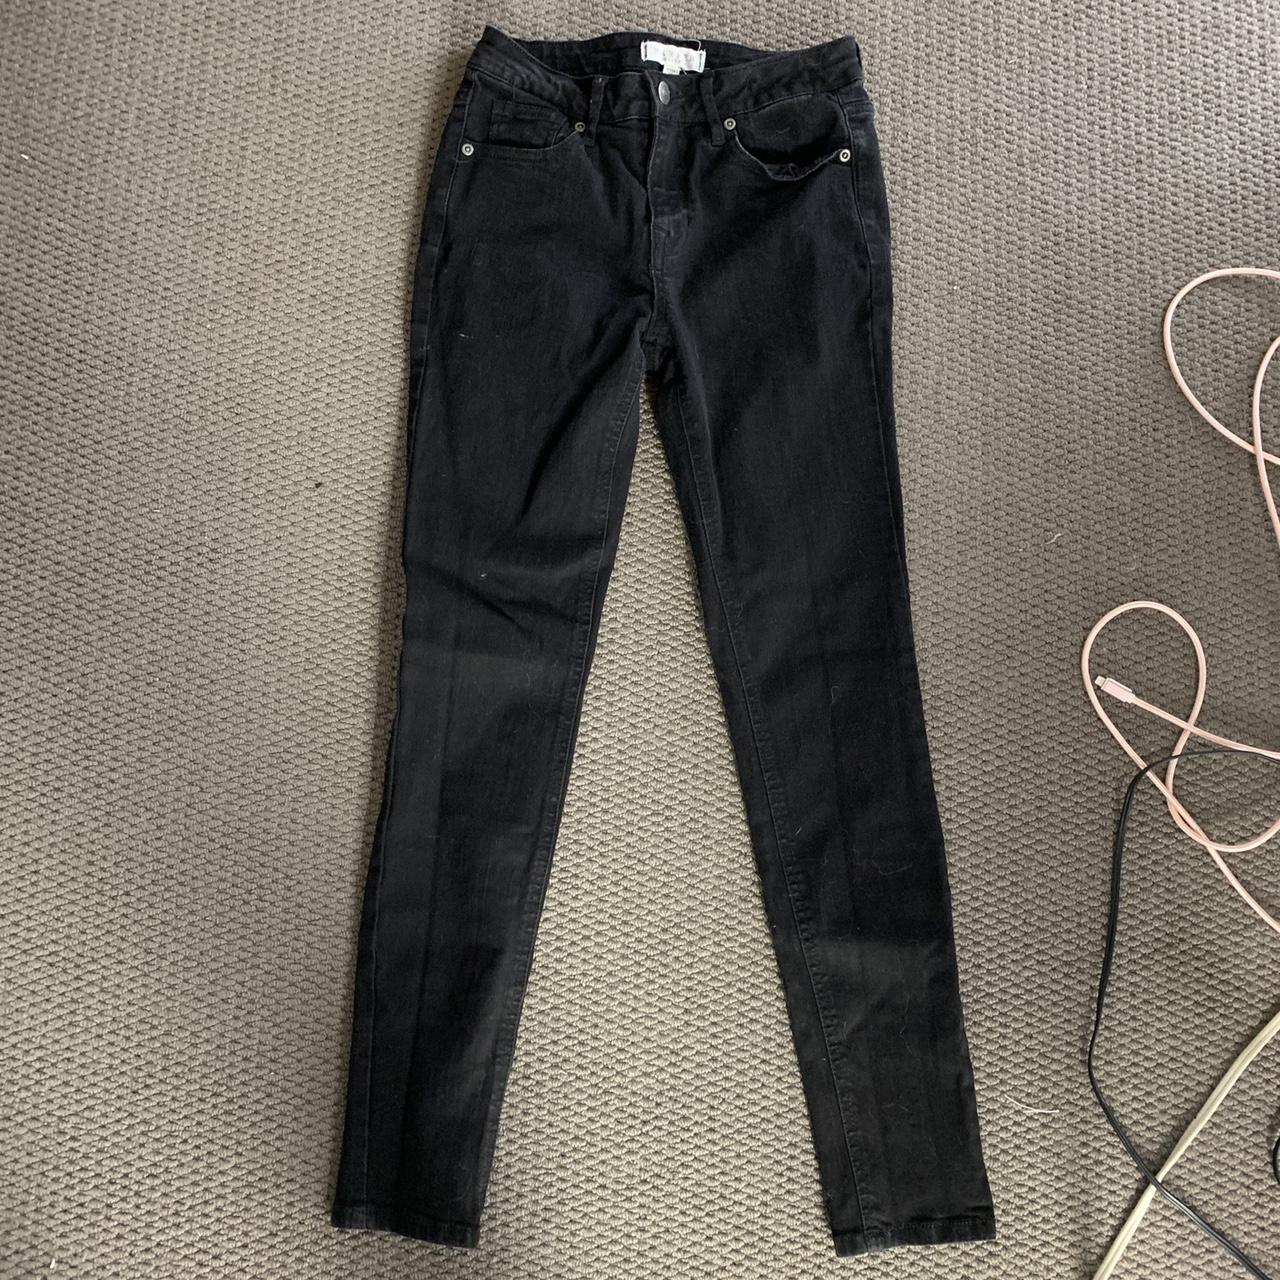 Great basic black mid rise skinny jeans from... - Depop